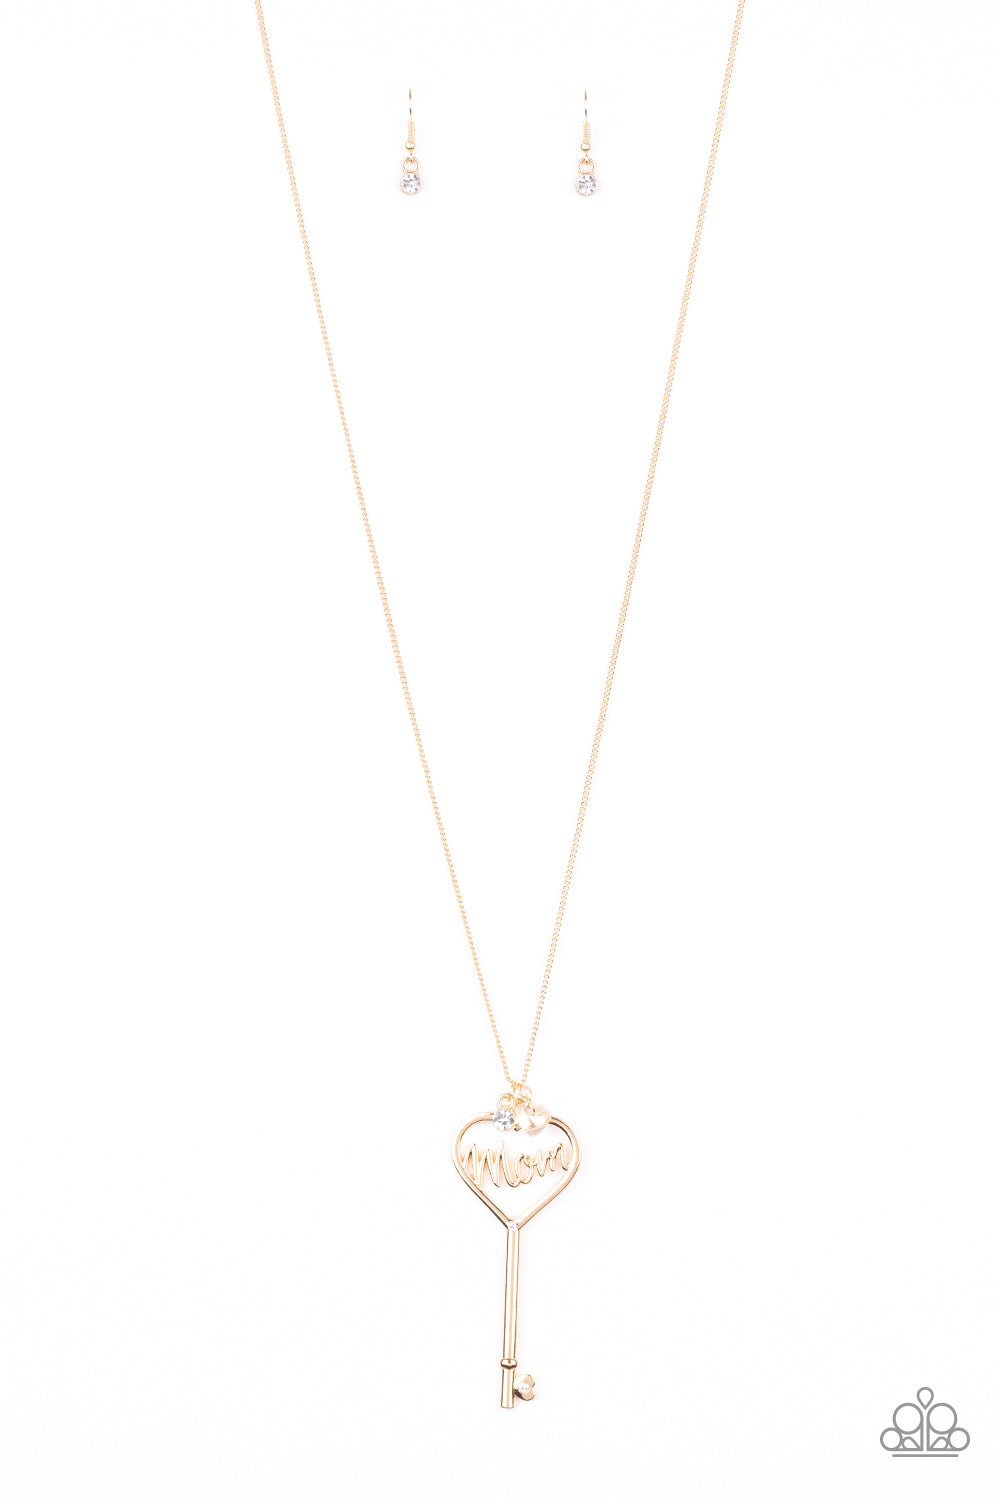 The Key To Mom's Heart Necklace__Gold